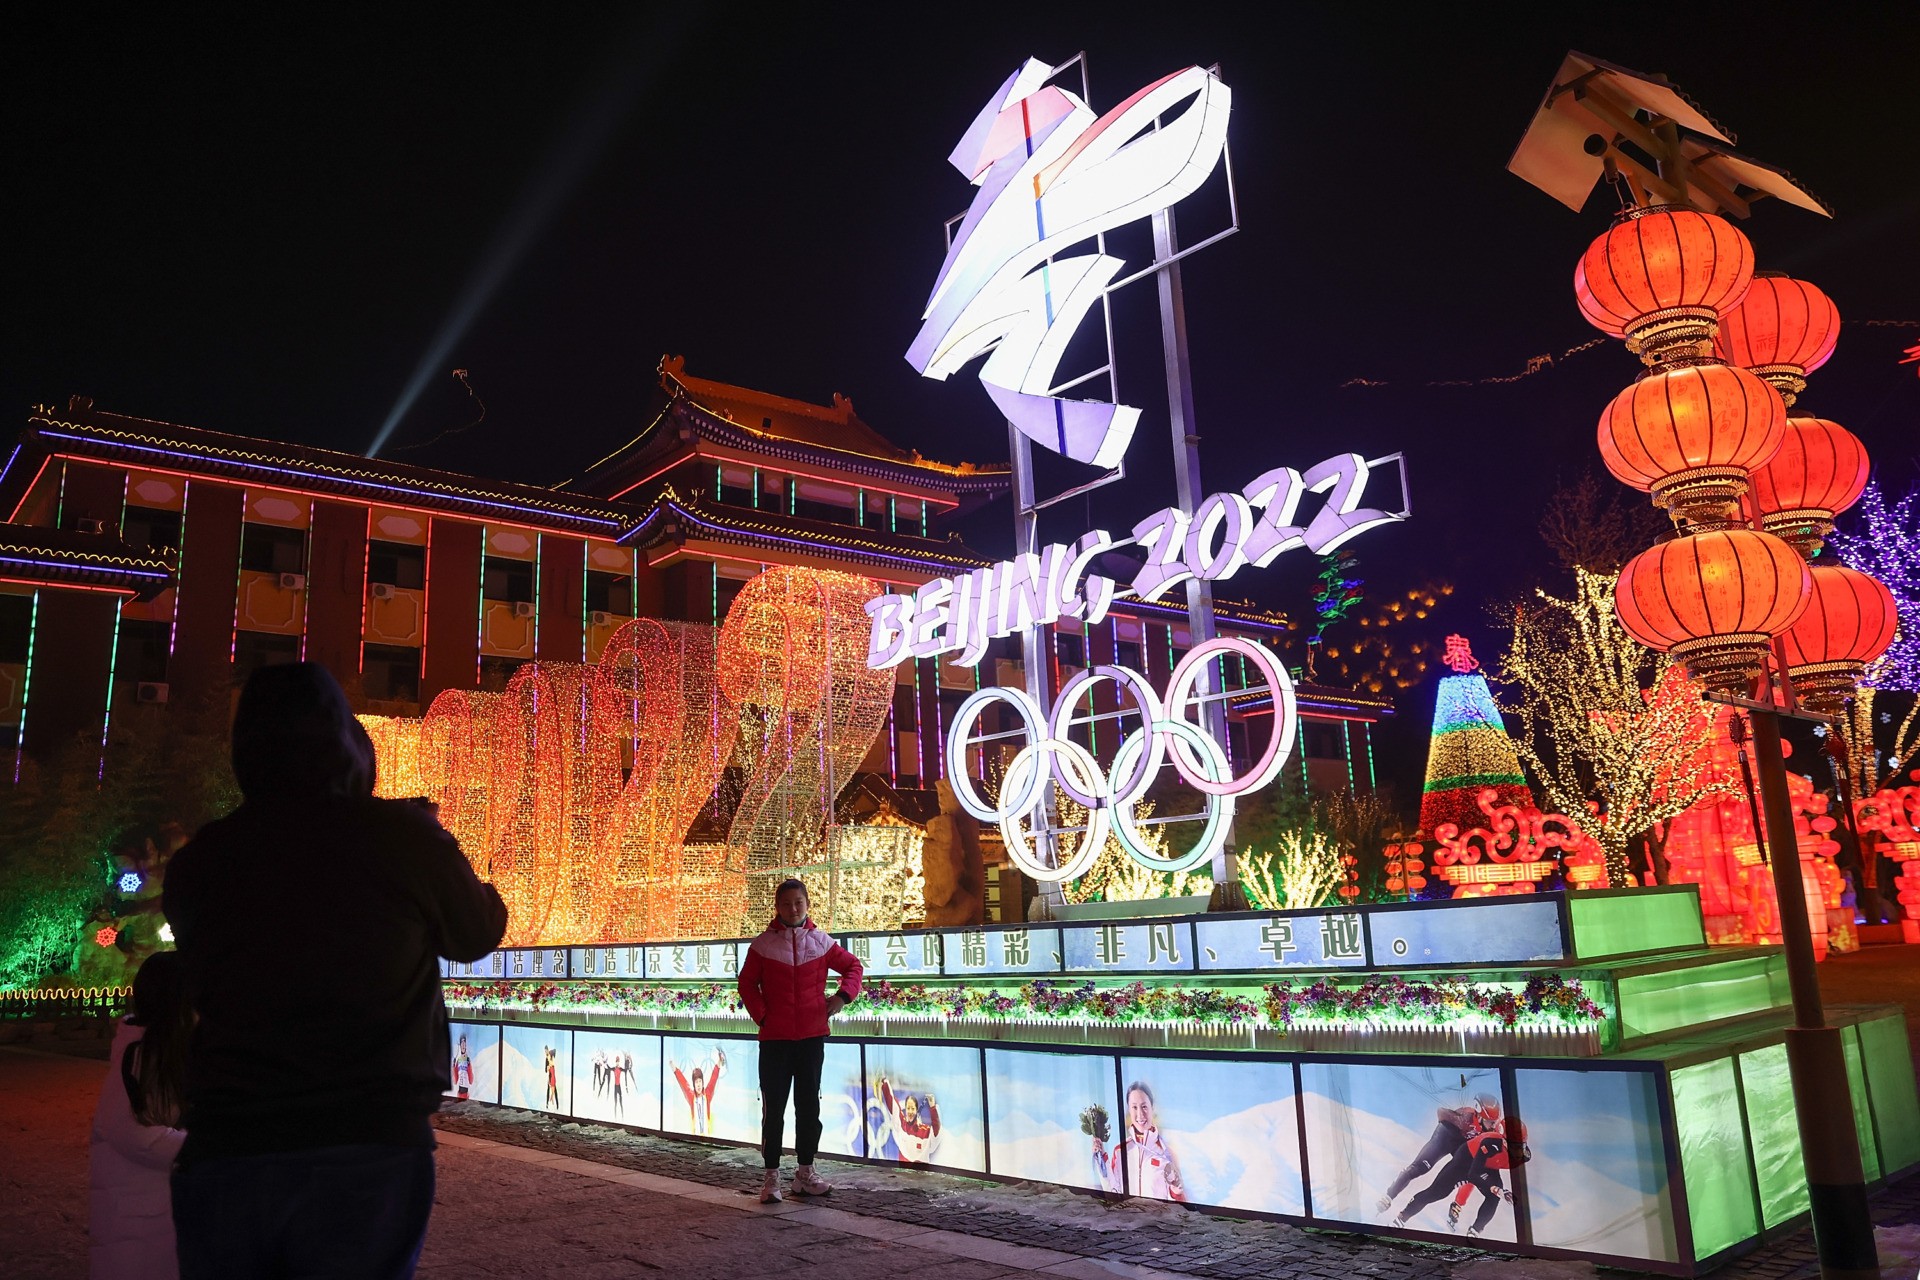 BEIJING, CHINA - FEBRUARY 26: People wear protective masks as they walk front the logos of the 2022 Beijing Winter Olympics at Yanqing Ice Festival on February 26, 2021 in Beijing, China. The Festival comes at the final day of the Chinese Lunar New Year celebrations. (Photo by Lintao Zhang/Getty Images)